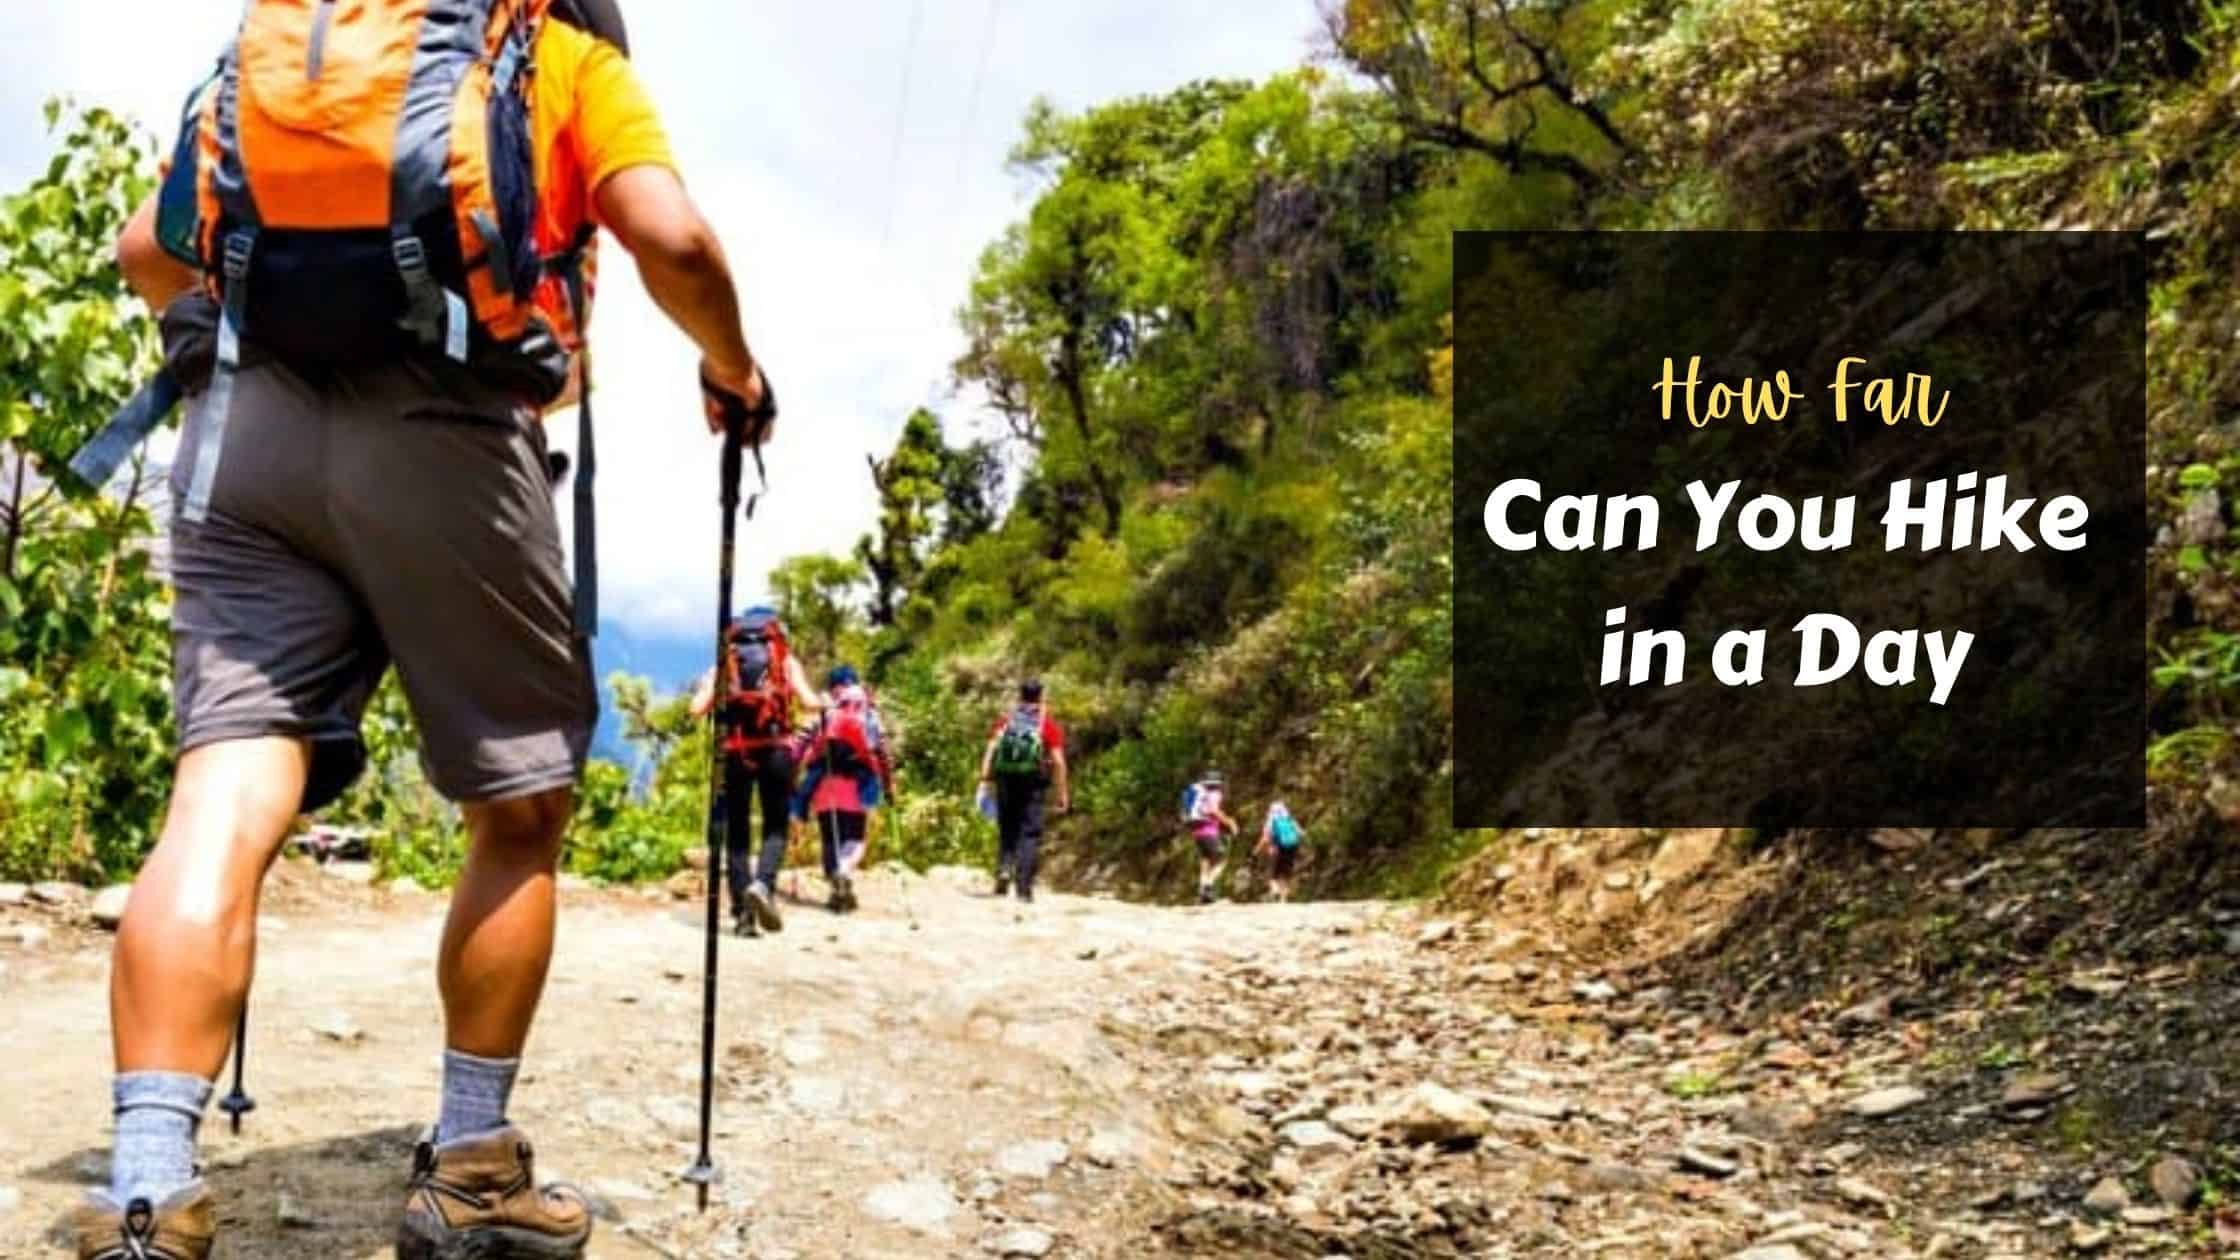 How Far Can You Hike in a Day